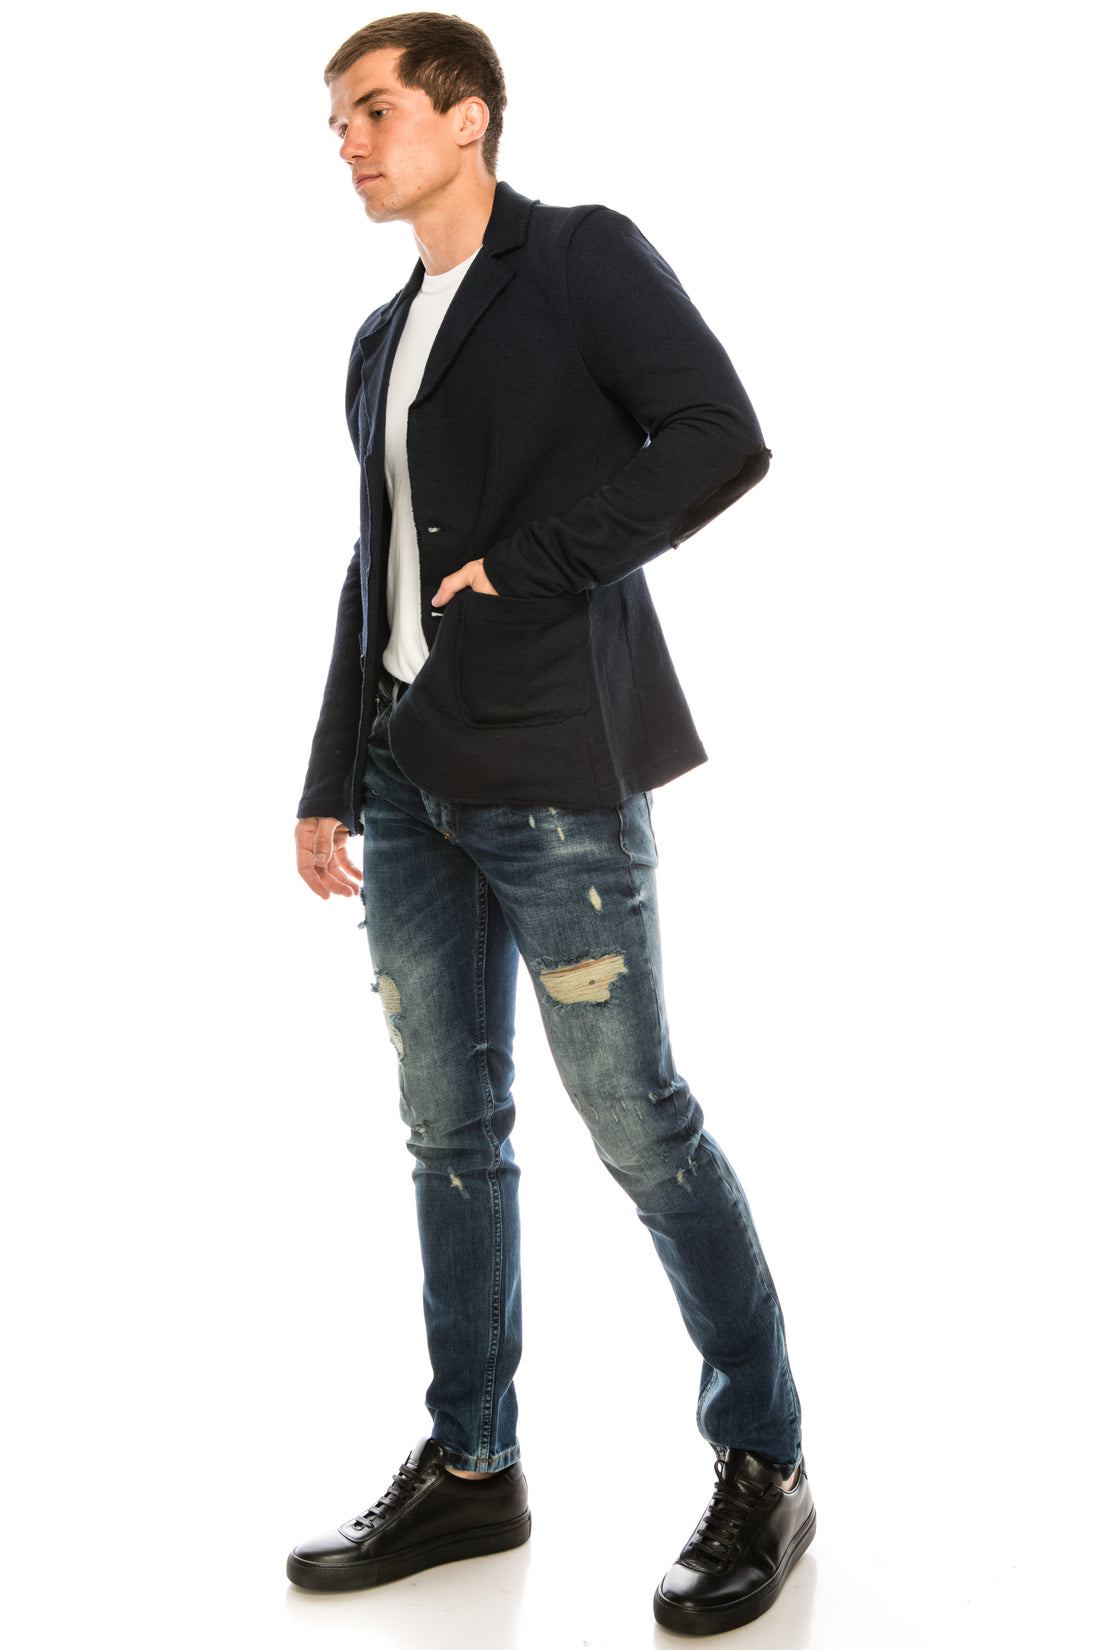 RAW EDGE FITTED CARDIGAN - NAVY - Ron Tomson